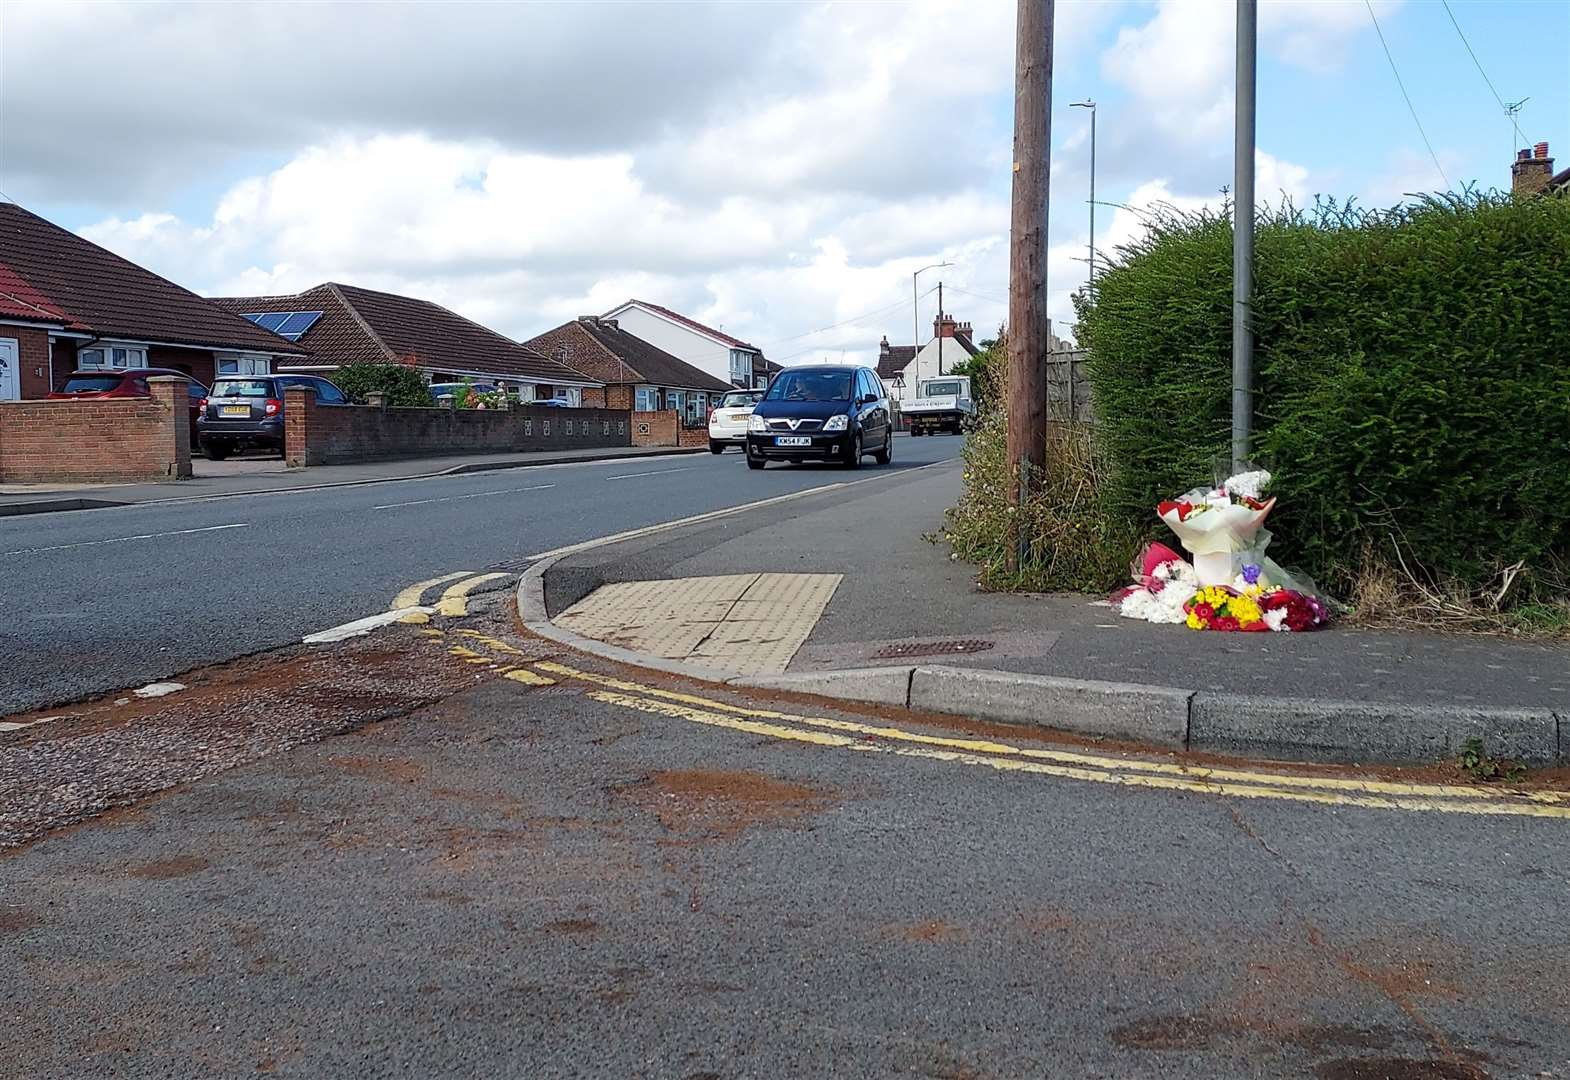 Flowers left at the scene of the accident in Ashford